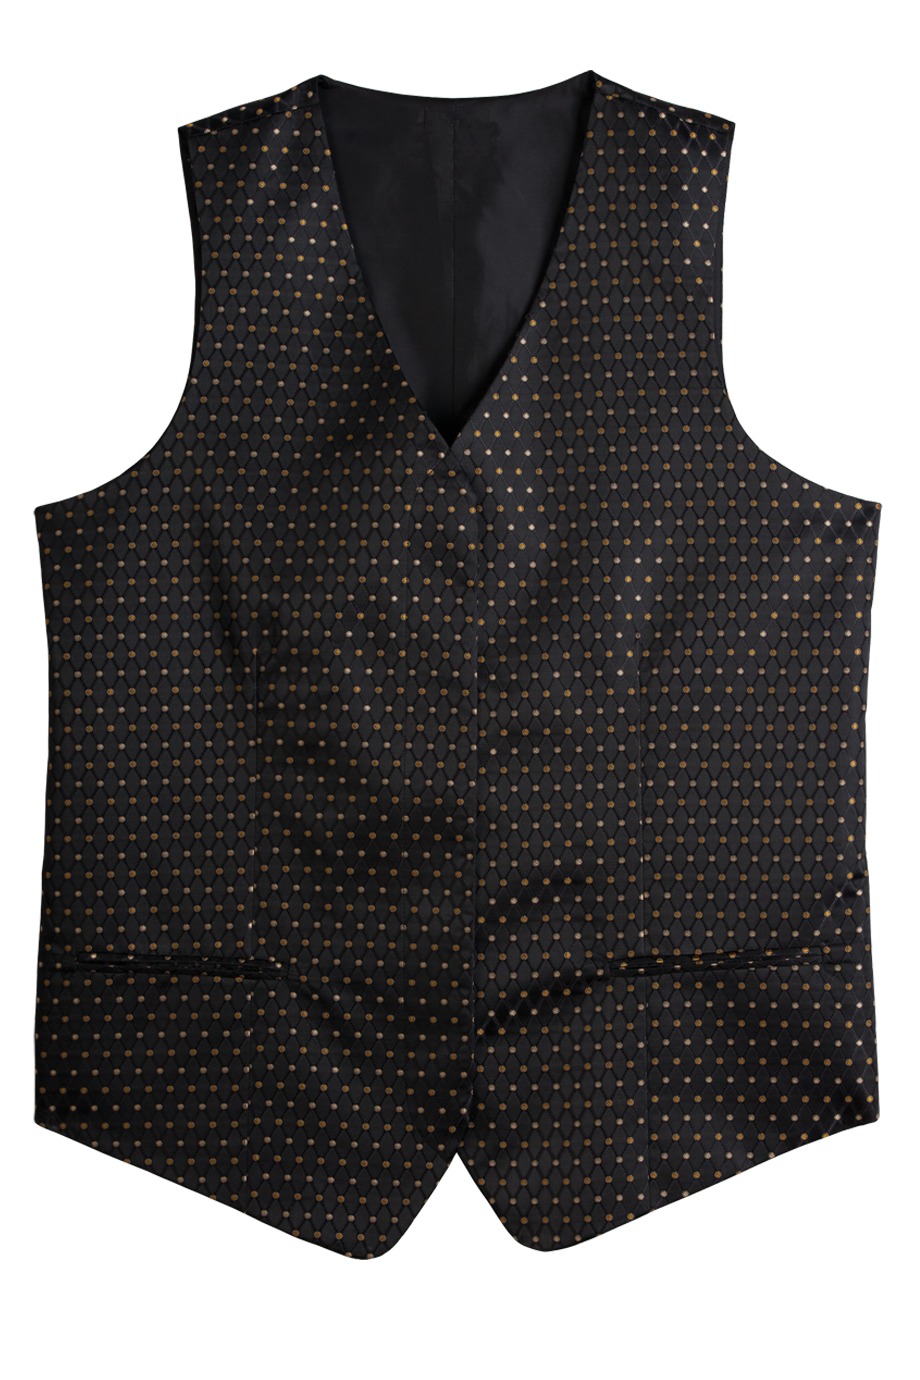 Edwards Garment 7497 - Ladies Fly Front Diamonds And Vest Dots